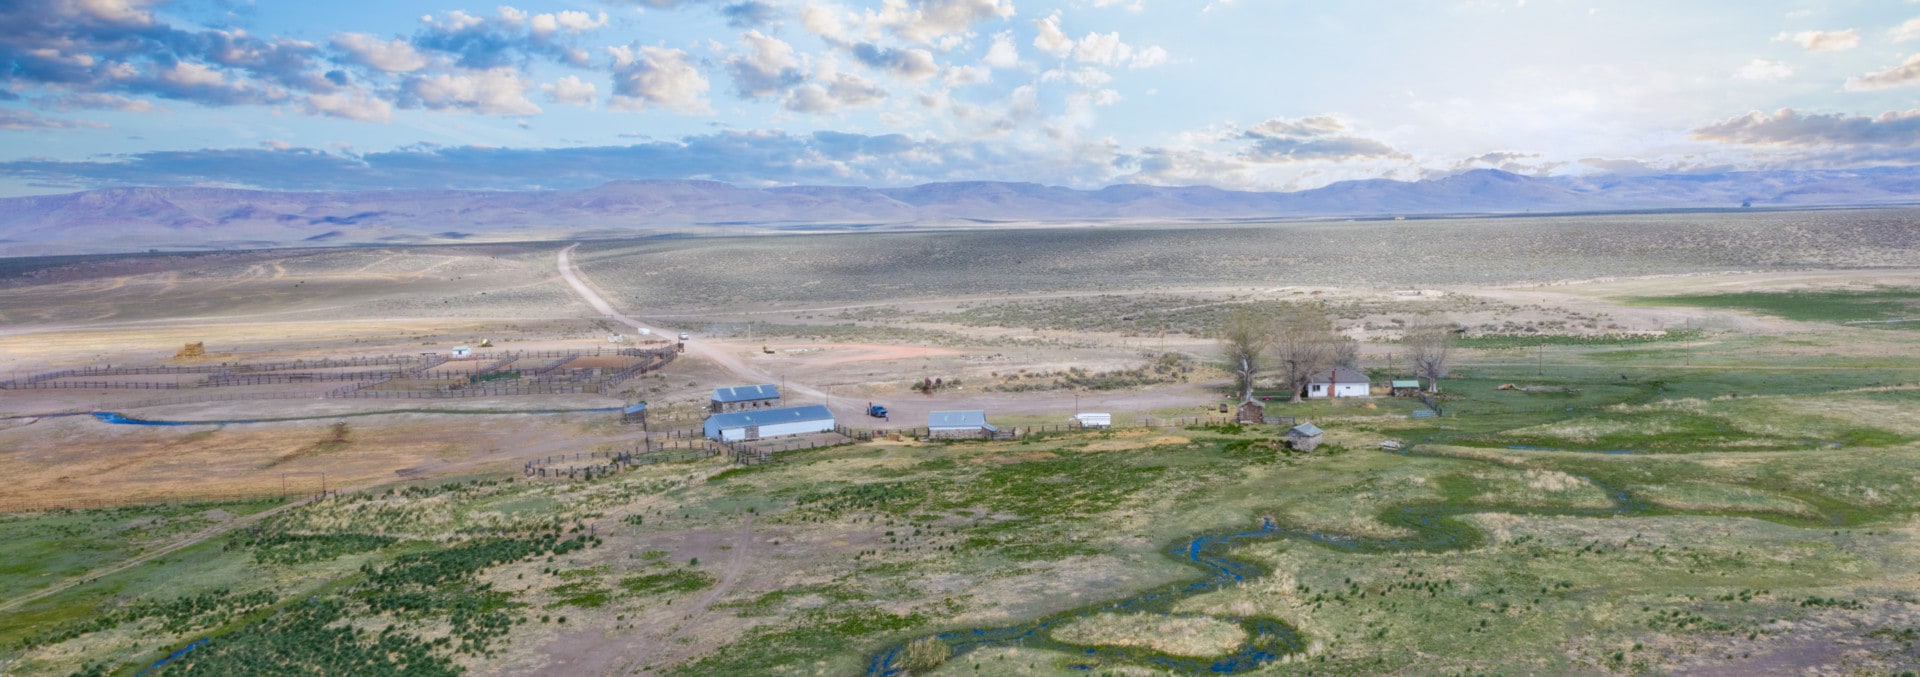 nevada ranch for sale Lucky 7 ranches